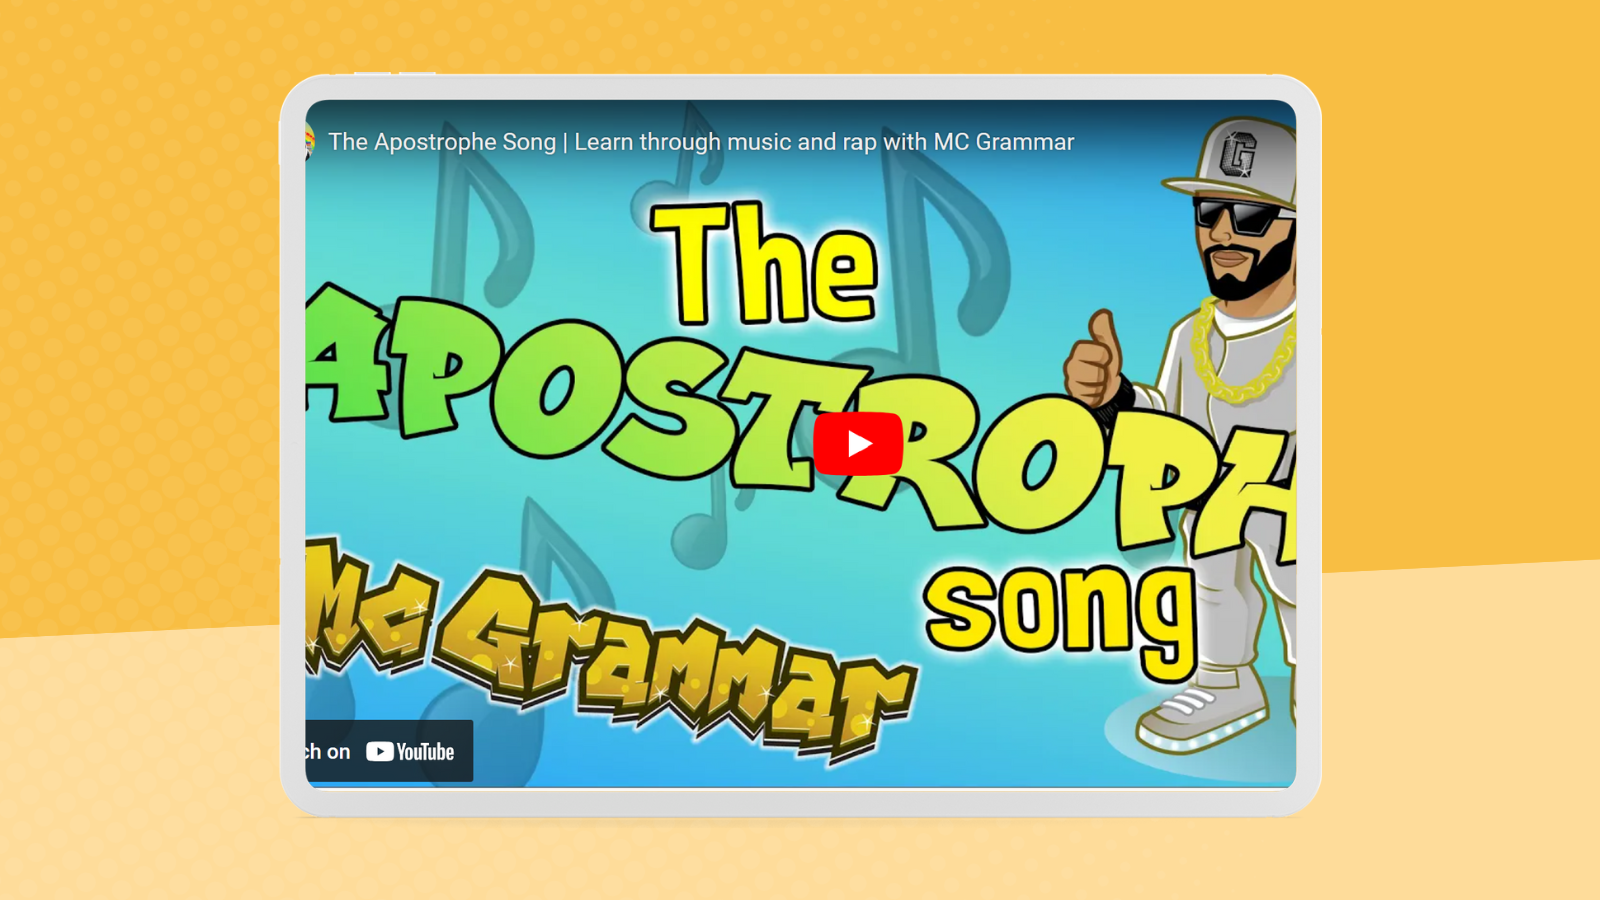 Example of a grammar rules song about the apostrophe by Mc Grammar on a tablet screen with yellow background.